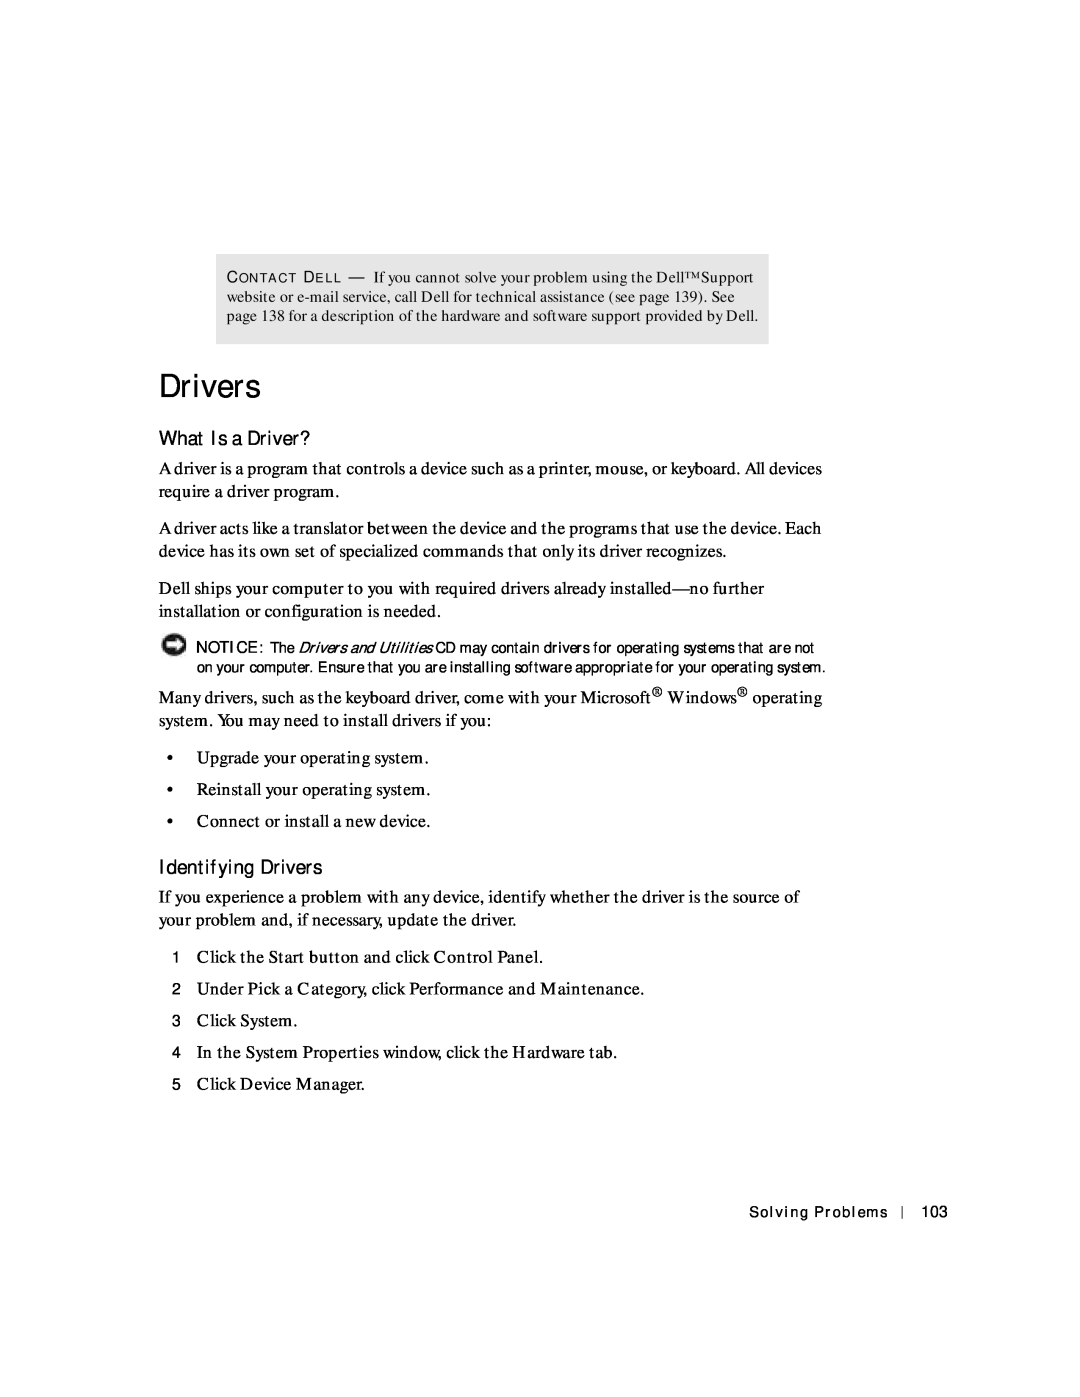 Dell 8600 manual What Is a Driver?, Identifying Drivers, Under Pick a Category, click Performance and Maintenance 